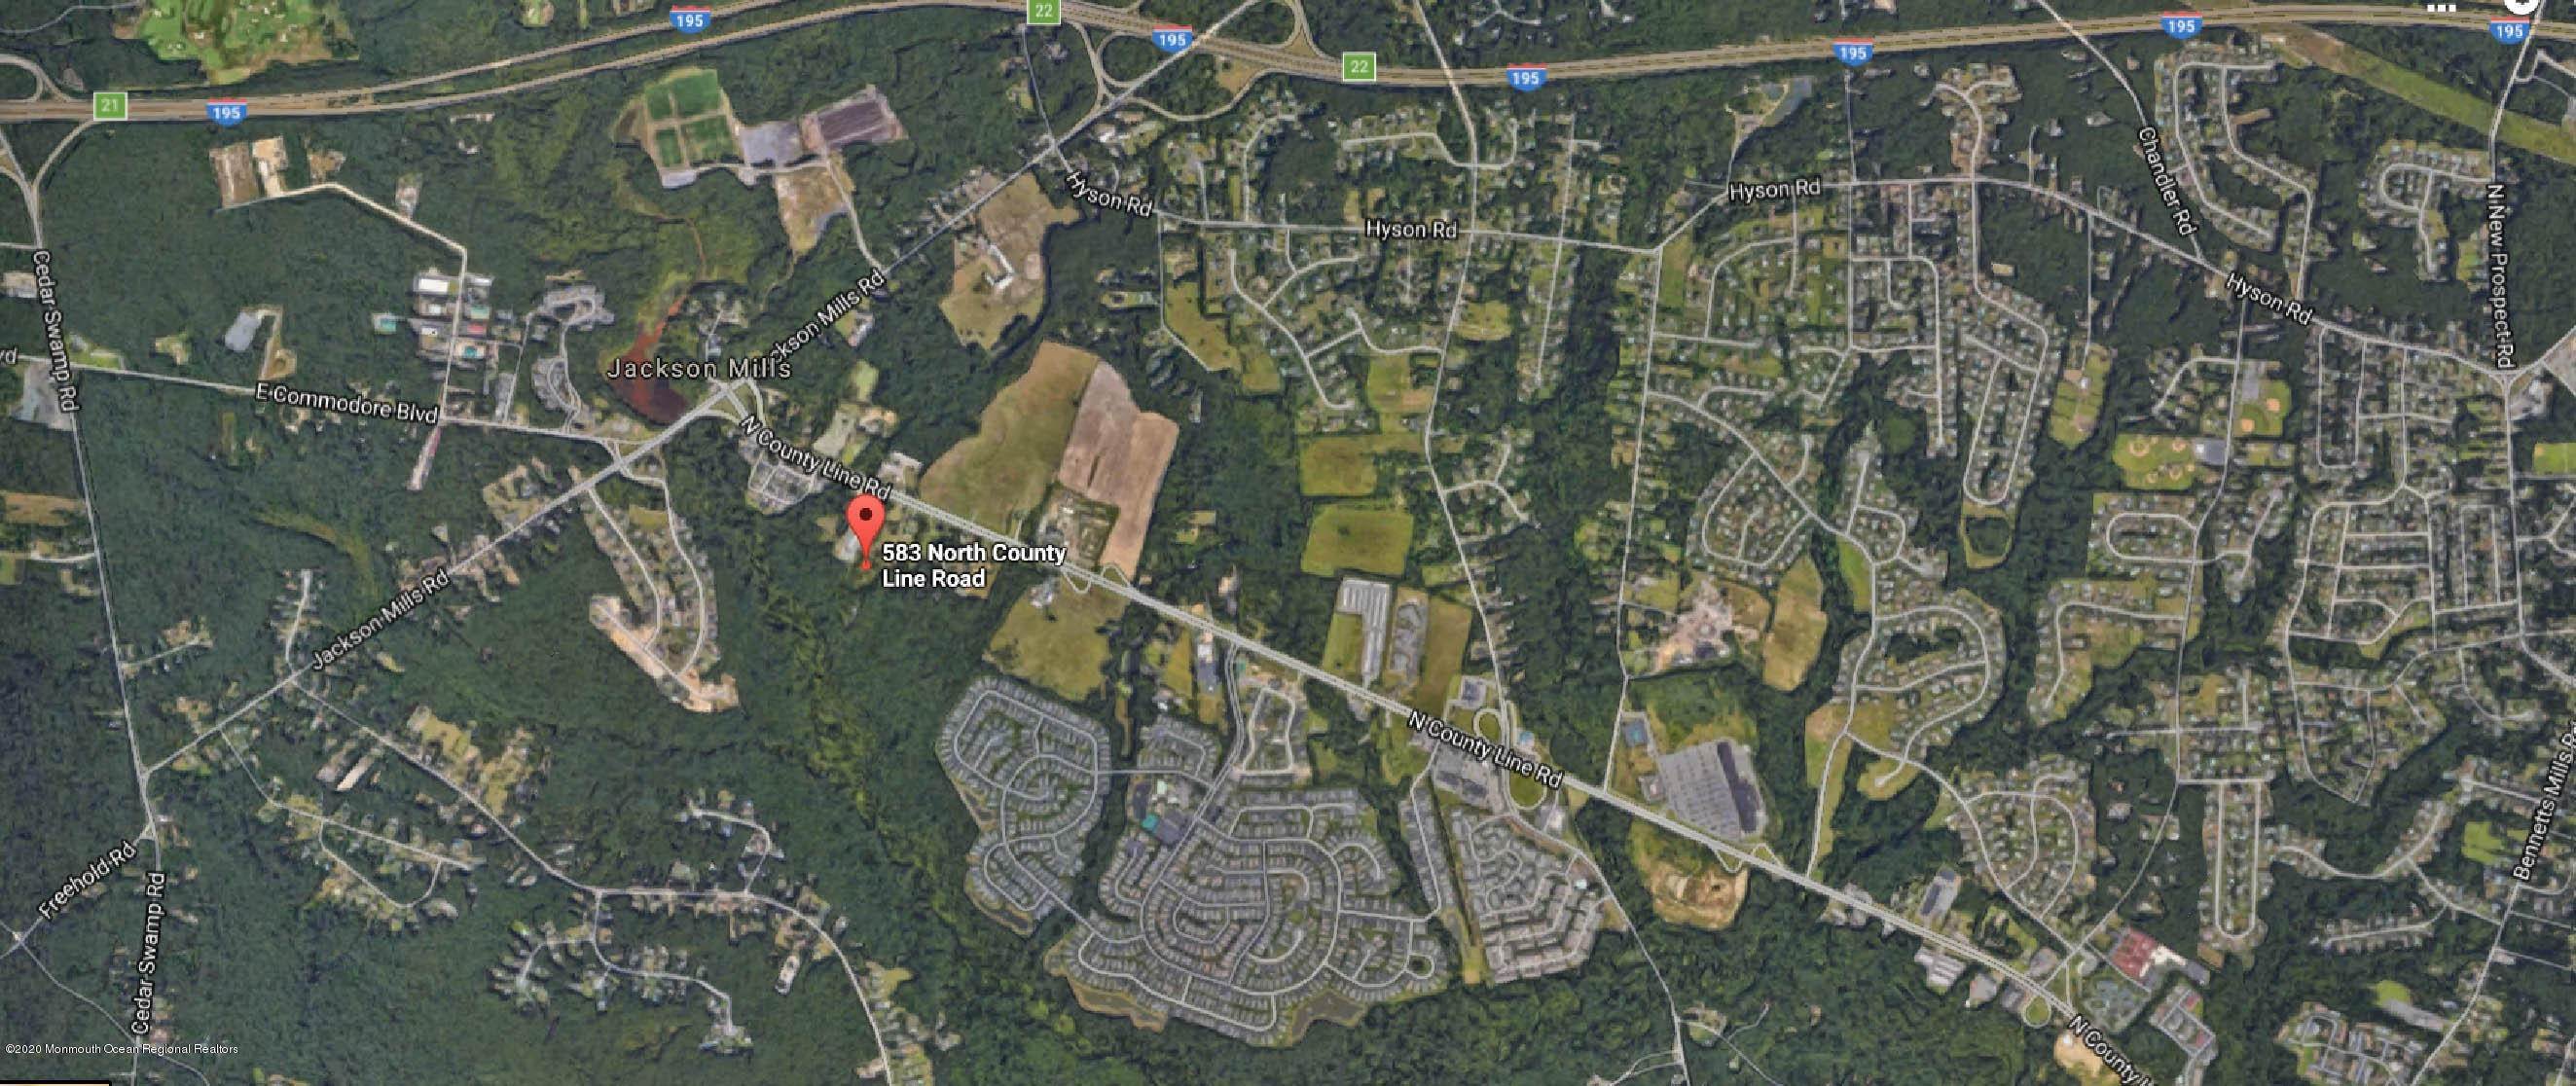 Property for Sale at 583 N County Line Road Jackson, New Jersey 08527 United States